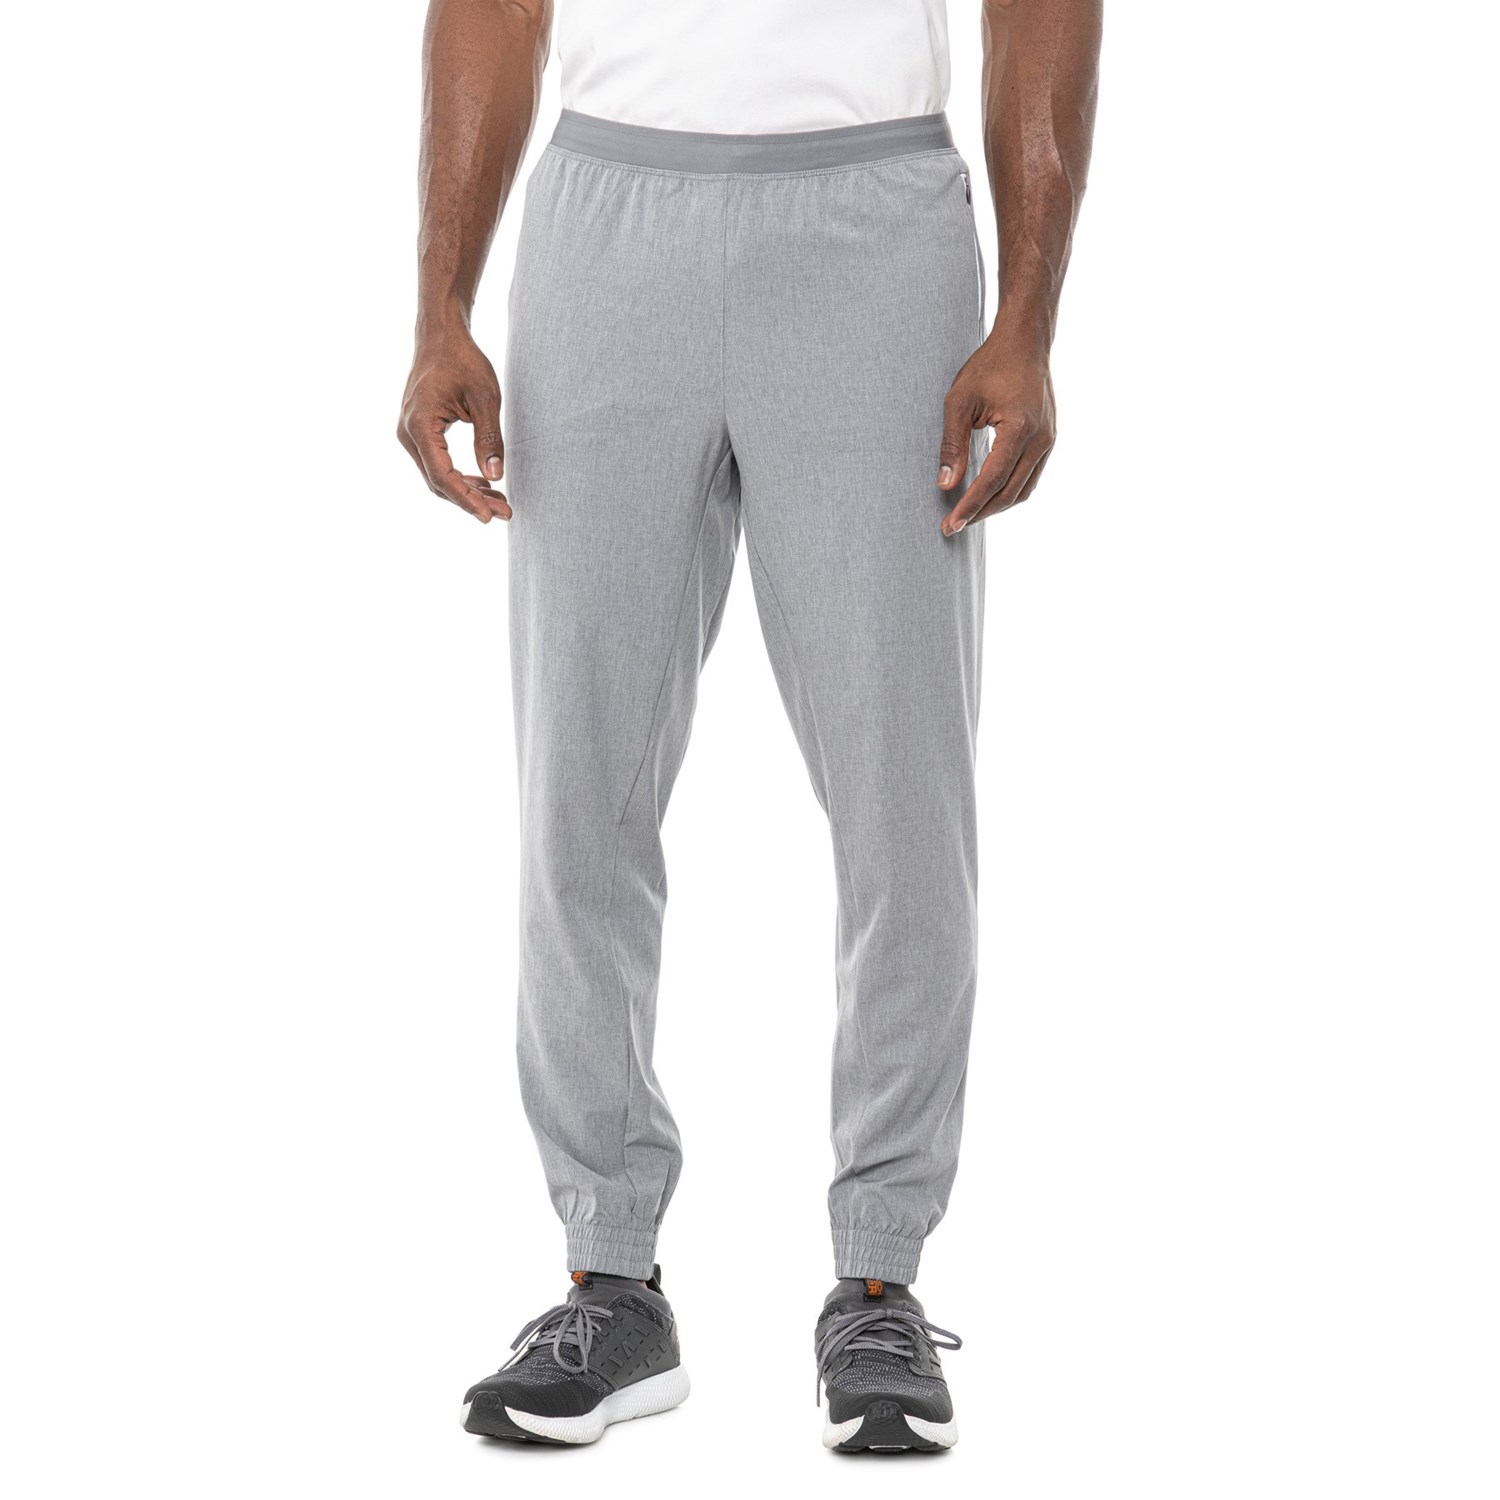 Skora Stretch-Woven Running Joggers (For Men) - Save 54%